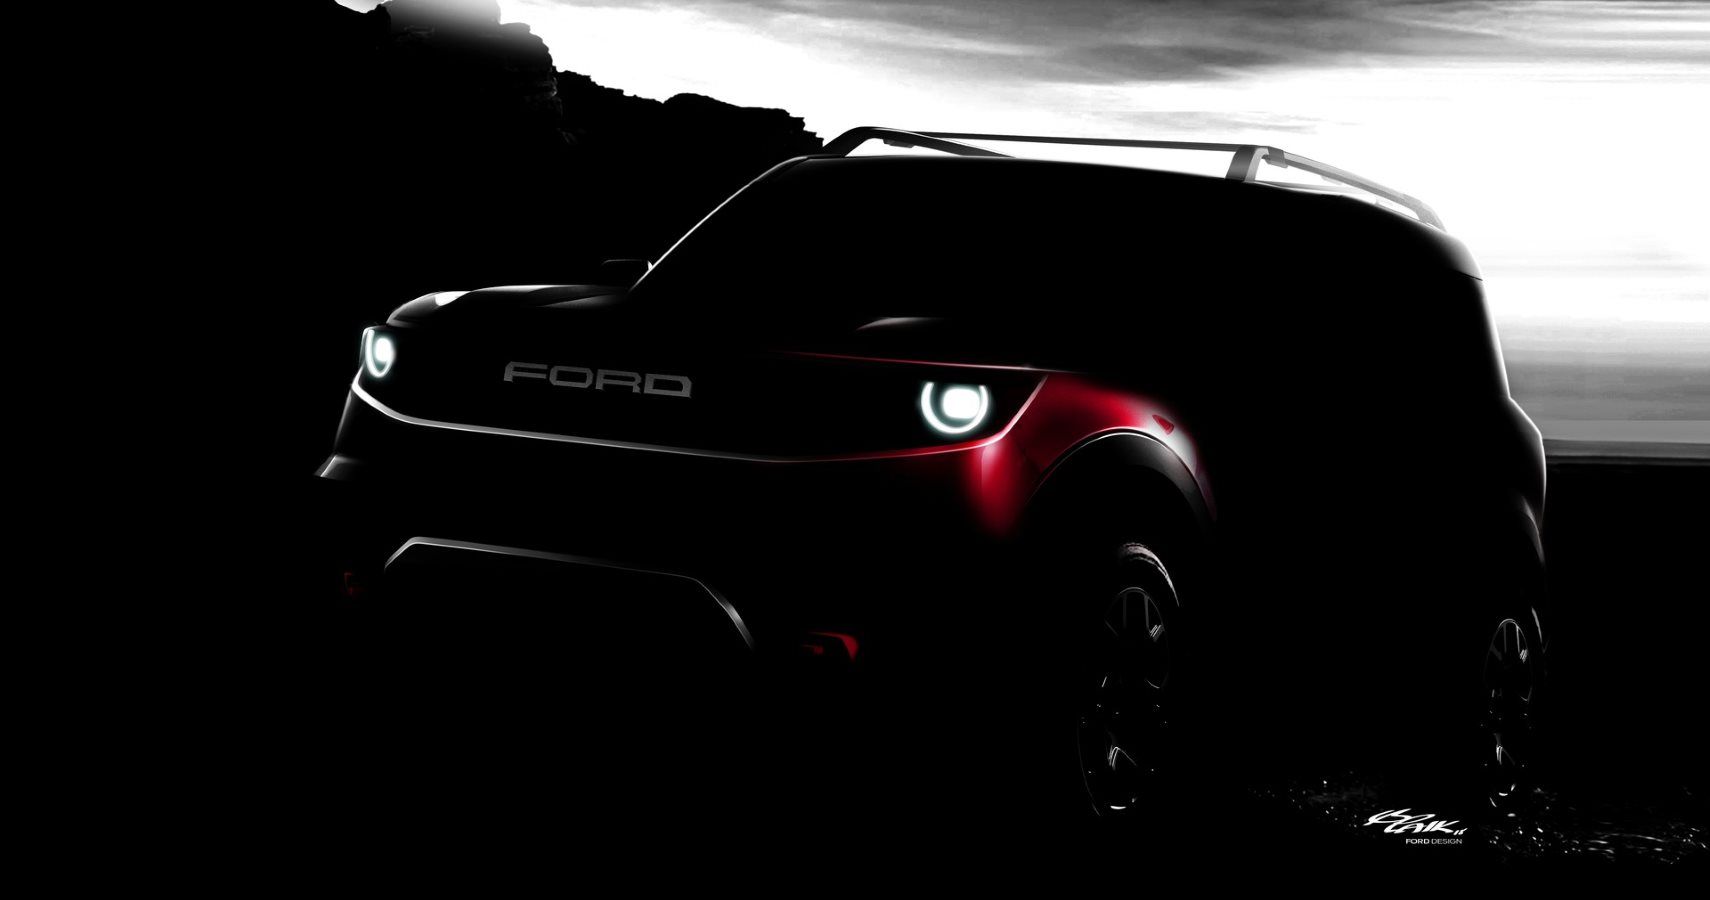 Development Of Off-Road Ford Escape Underway--Could This Be The Baby Bronco?